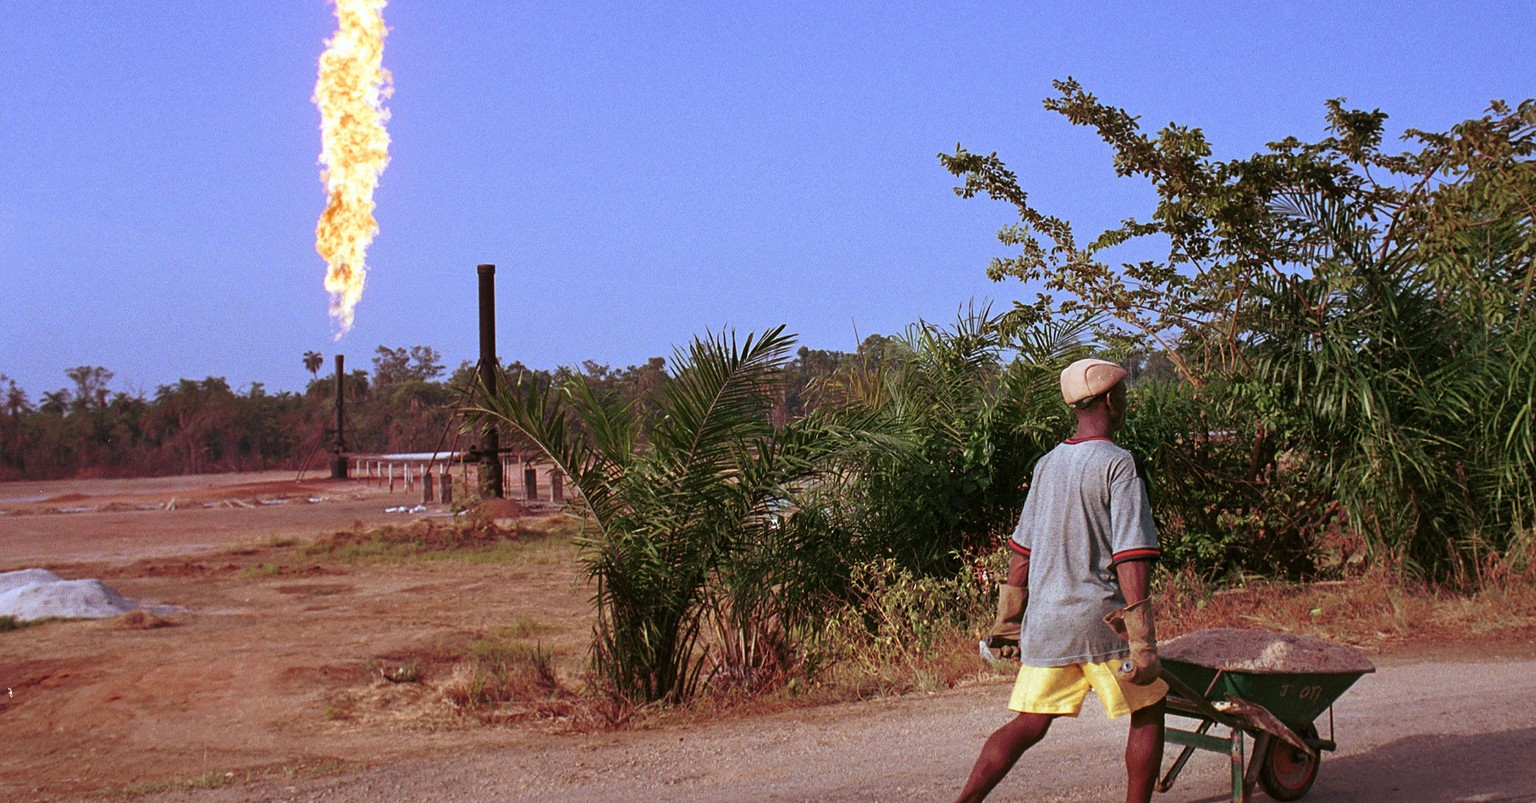 390464 36: A villager walks past a column of fire from the Oshie flare station owned by Italian oil company Agip, March 8, 2001 near Akaraolu, Nigeria. The natural gas flare was lit in 1972 and has be ...